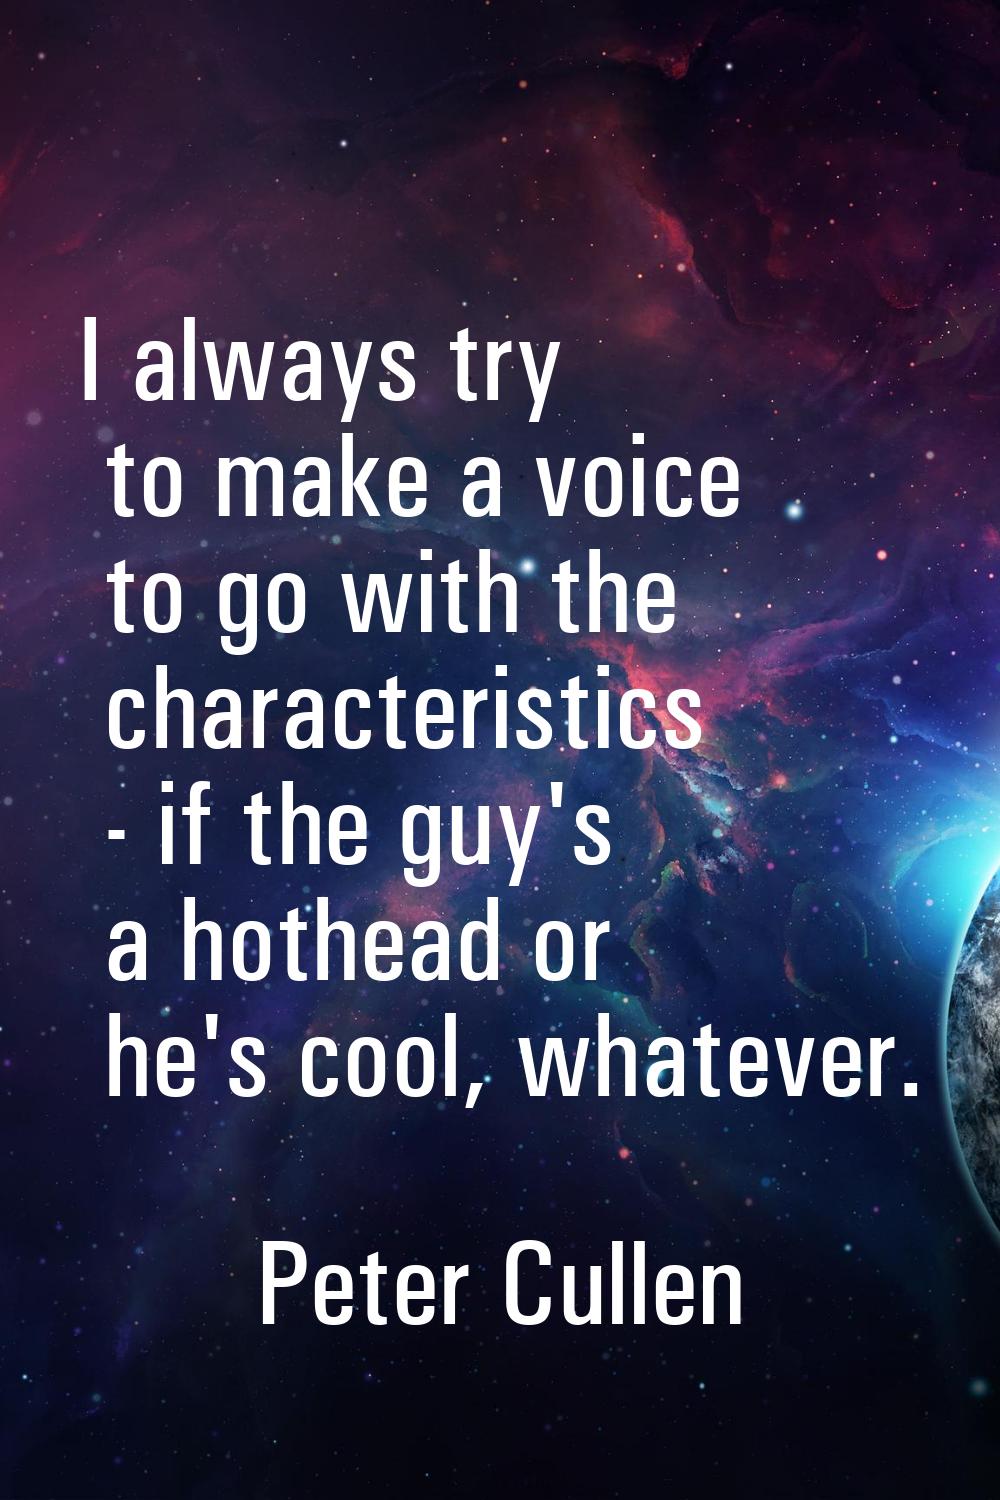 I always try to make a voice to go with the characteristics - if the guy's a hothead or he's cool, 